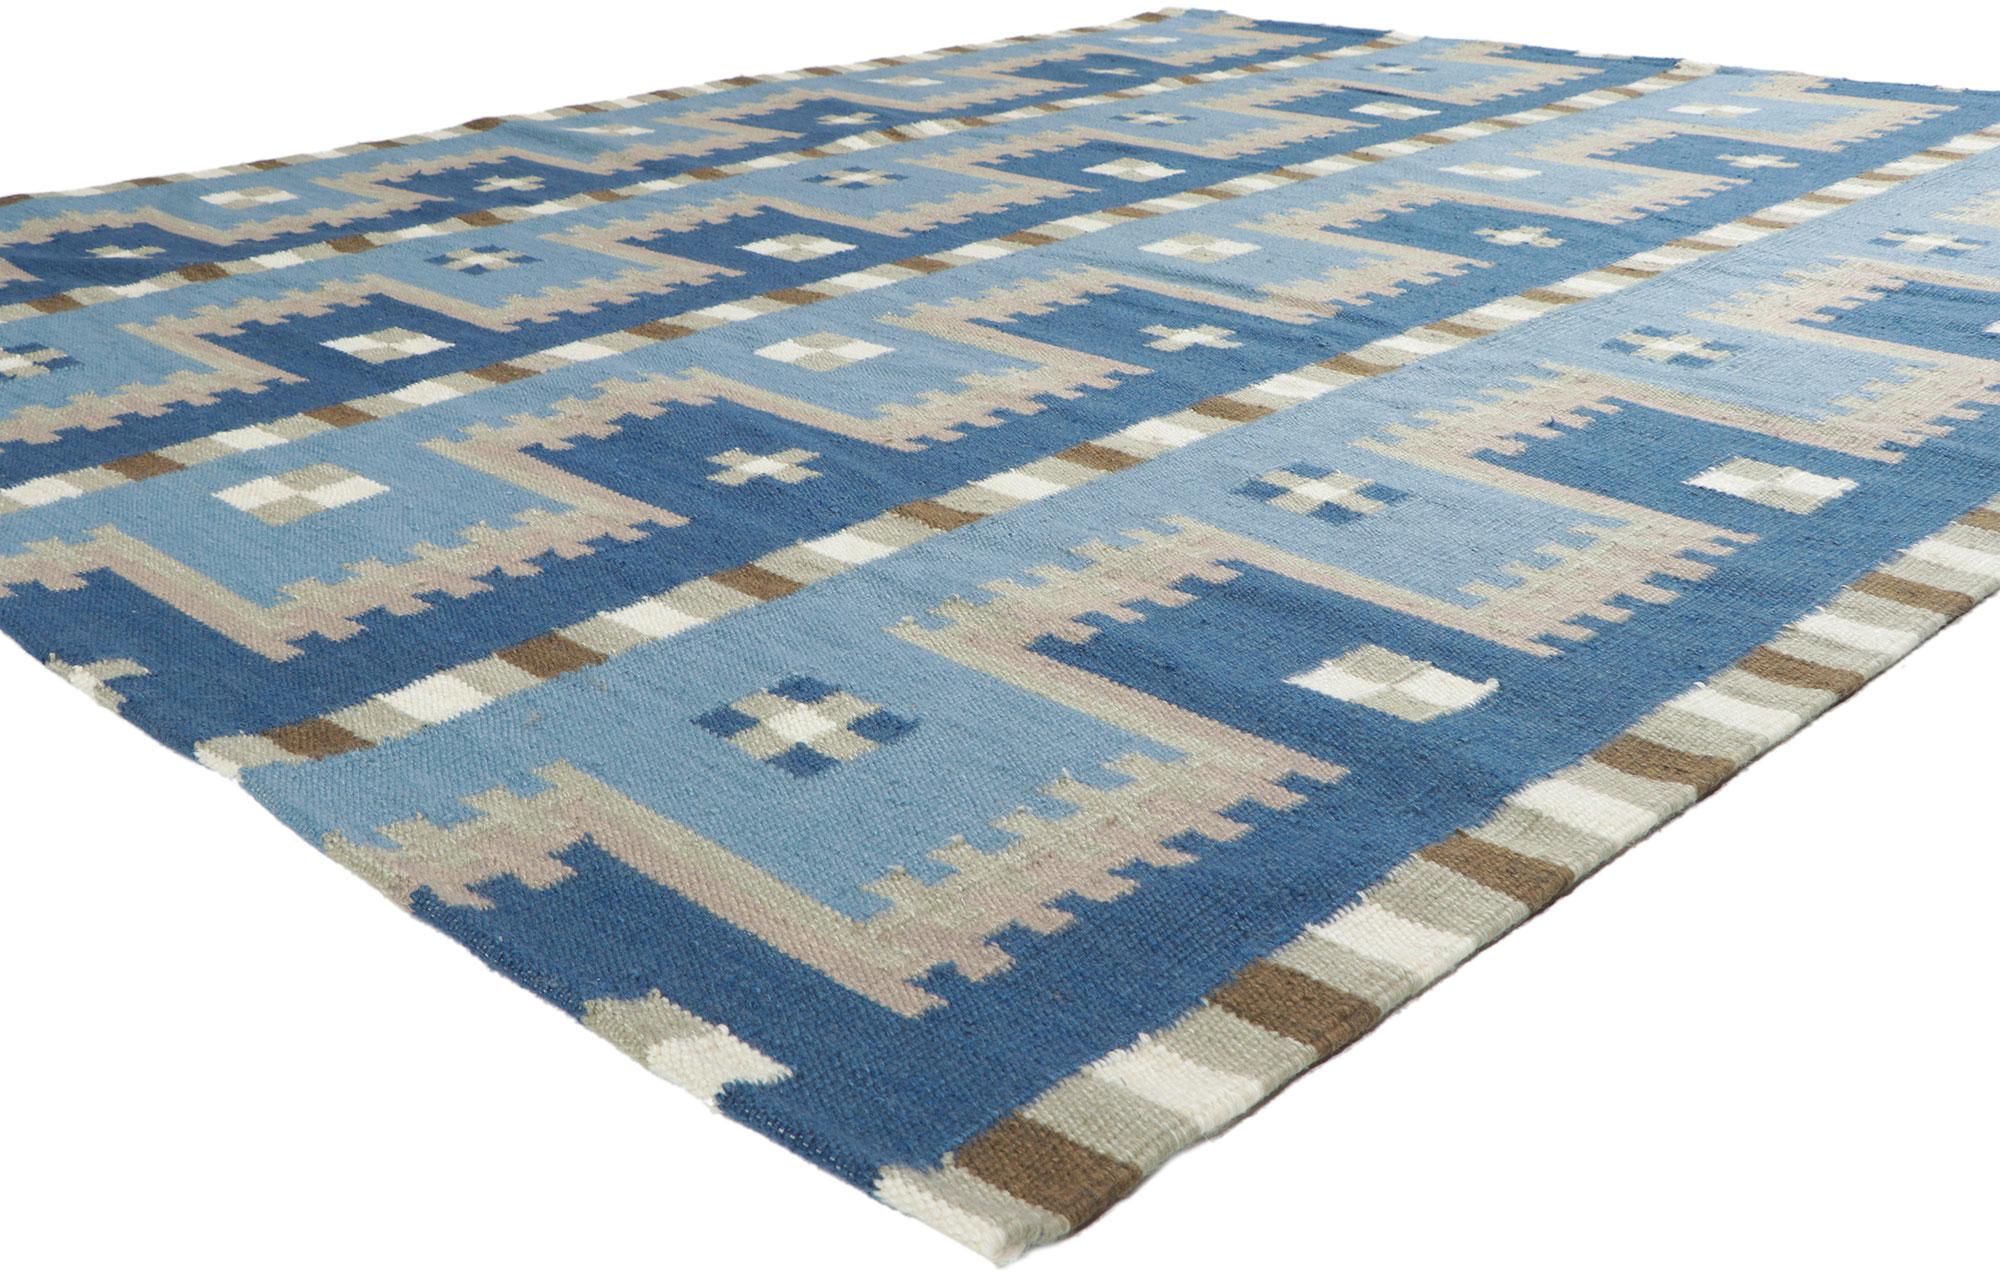 30965 New Swedish Inspired Kilim Rug, 08'01 x 09'11.
?Showcasing the bolder side of Scandinavian design, this handwoven Swedish style kilim rug is a captivating vision of woven beauty. The eye-catching geometric design and blue hues woven into this